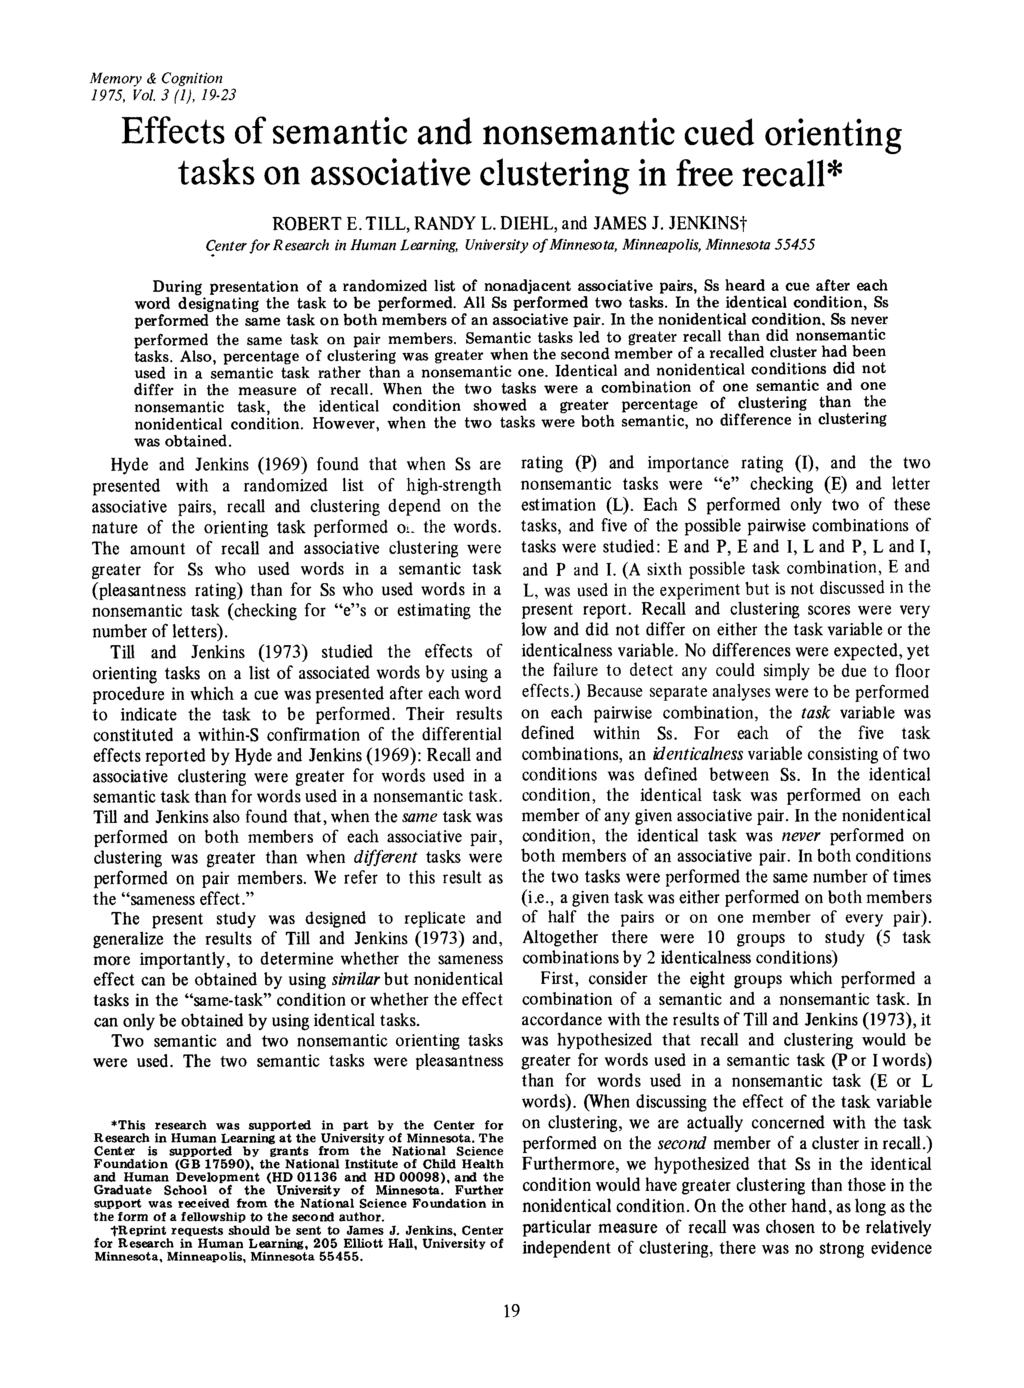 Memory & Cognition 1975, Vol. 3 (1),19-23 Effects of semantic and nonsemantic cued orienting tasks on associative clustering in free recall* ROBERT E. TILL, RANDY L. DIEHL, and JAMES J.